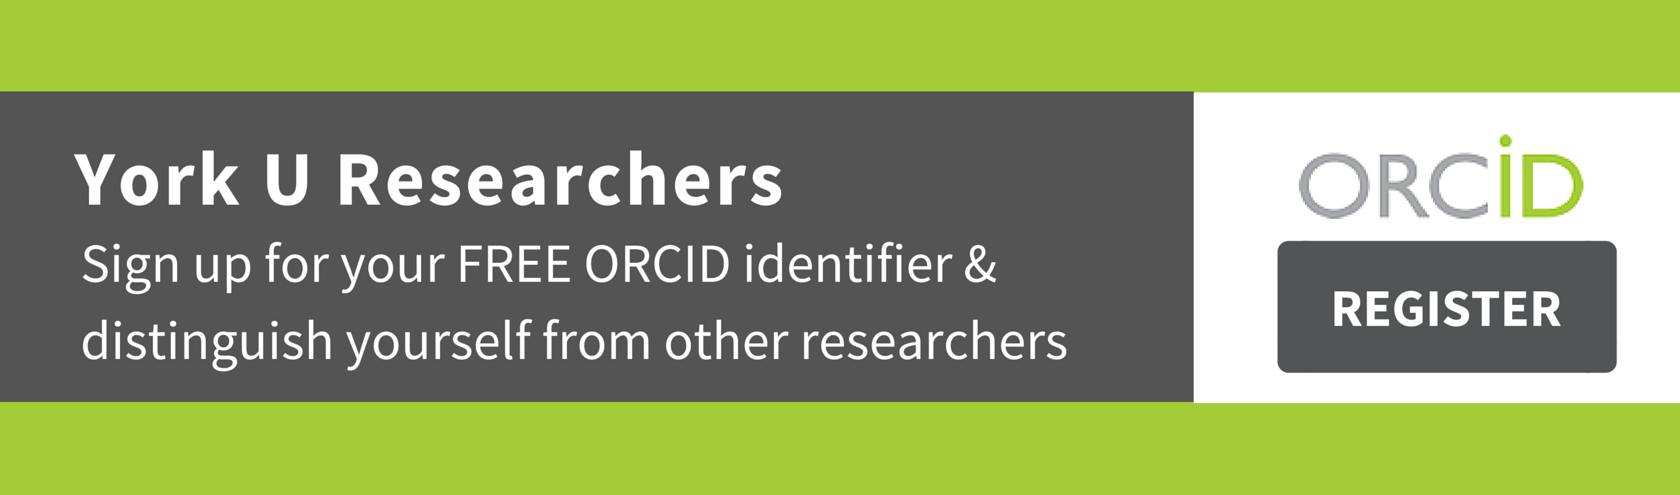 orcid_web_banner2_1680x495